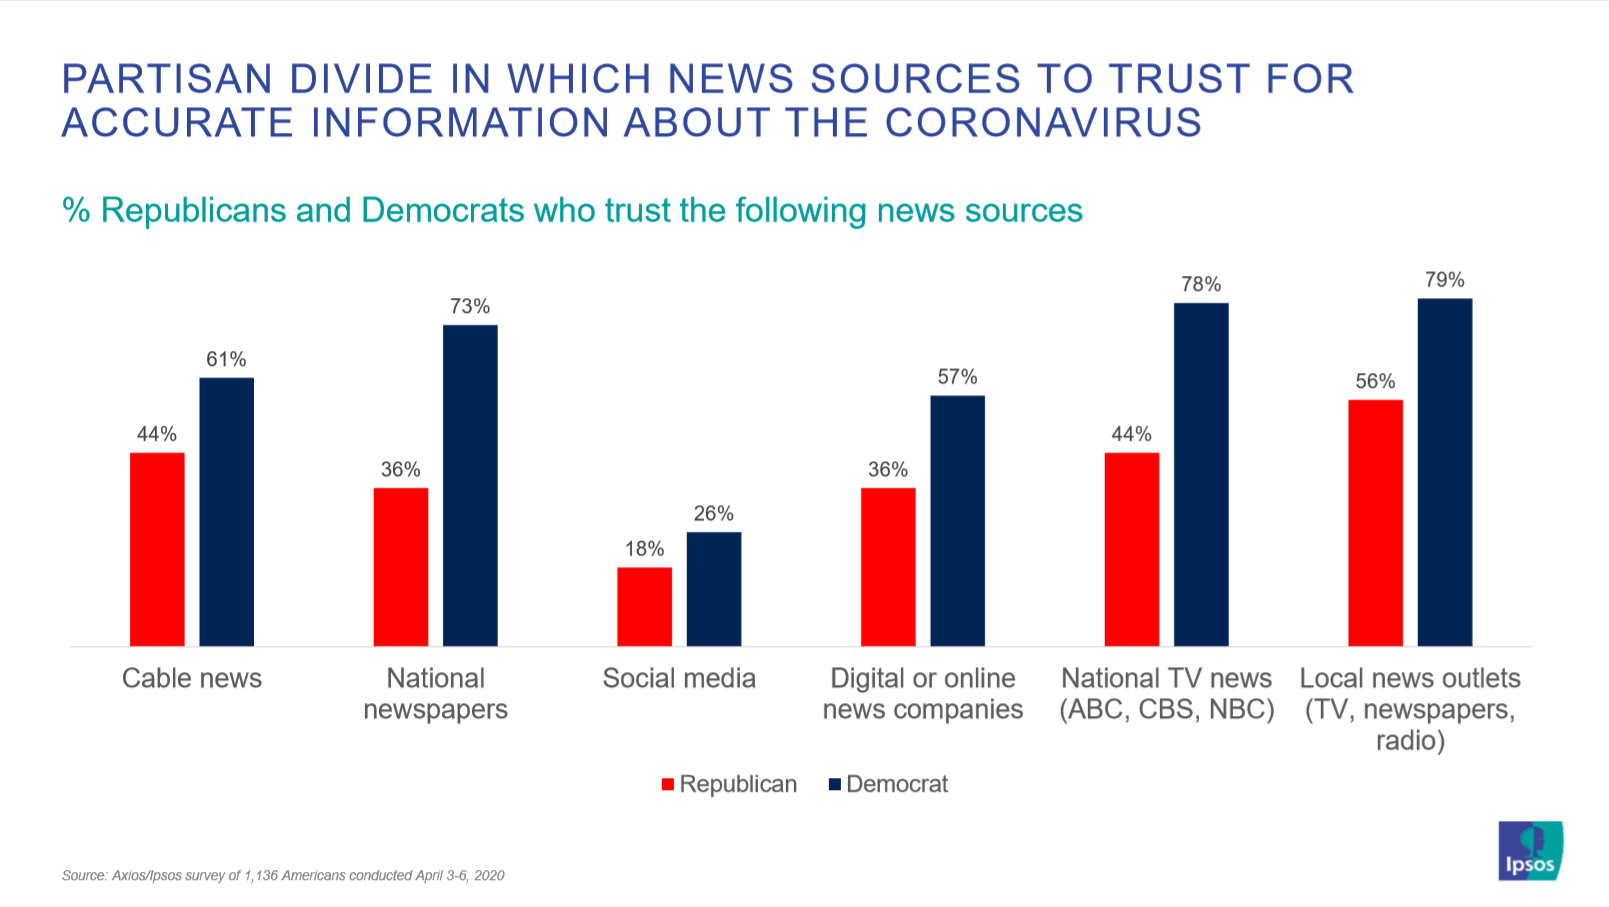 Partisan divide in trust in news